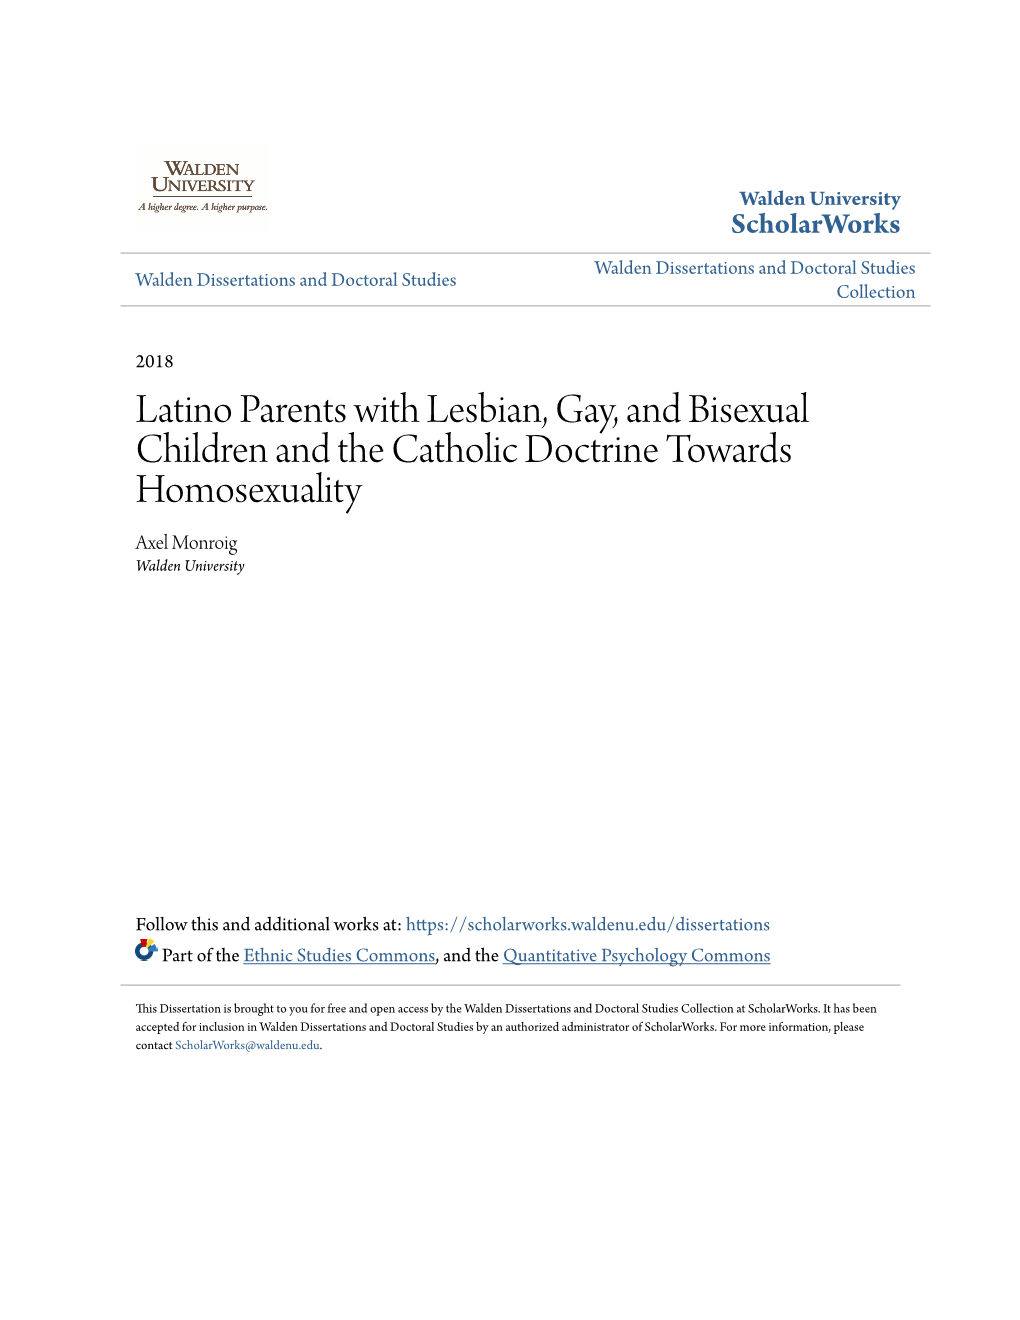 Latino Parents with Lesbian, Gay, and Bisexual Children and the Catholic Doctrine Towards Homosexuality Axel Monroig Walden University